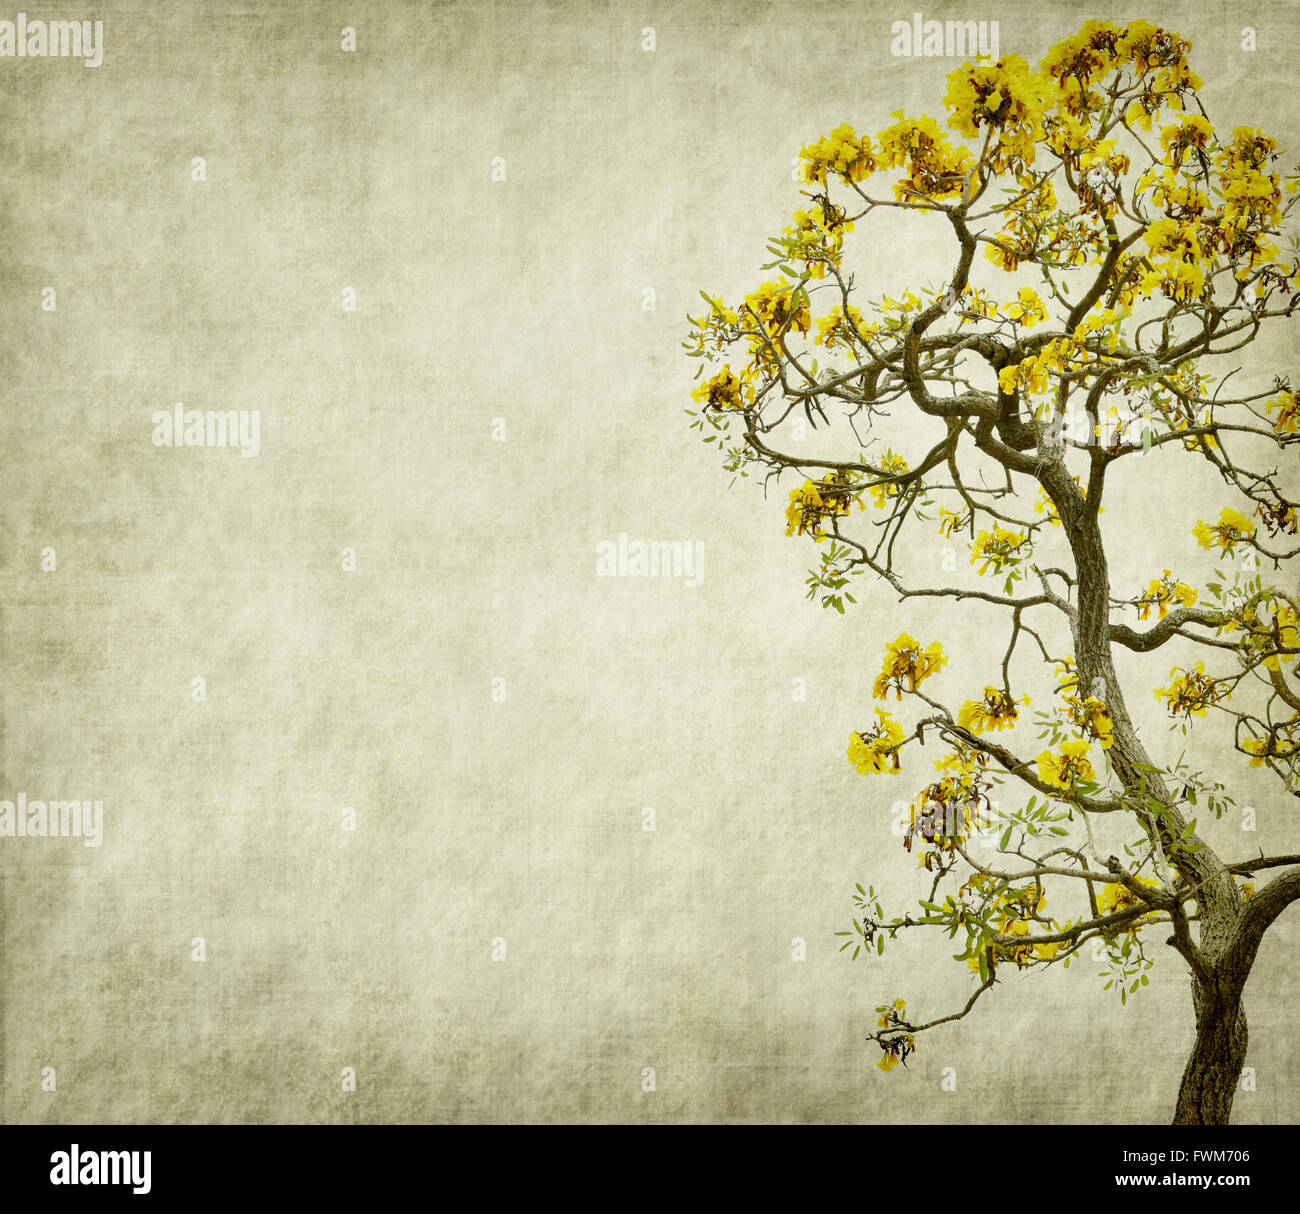 Tabebuia chrysotricha yellow flowers blossom in spring on old paper background Stock Photo